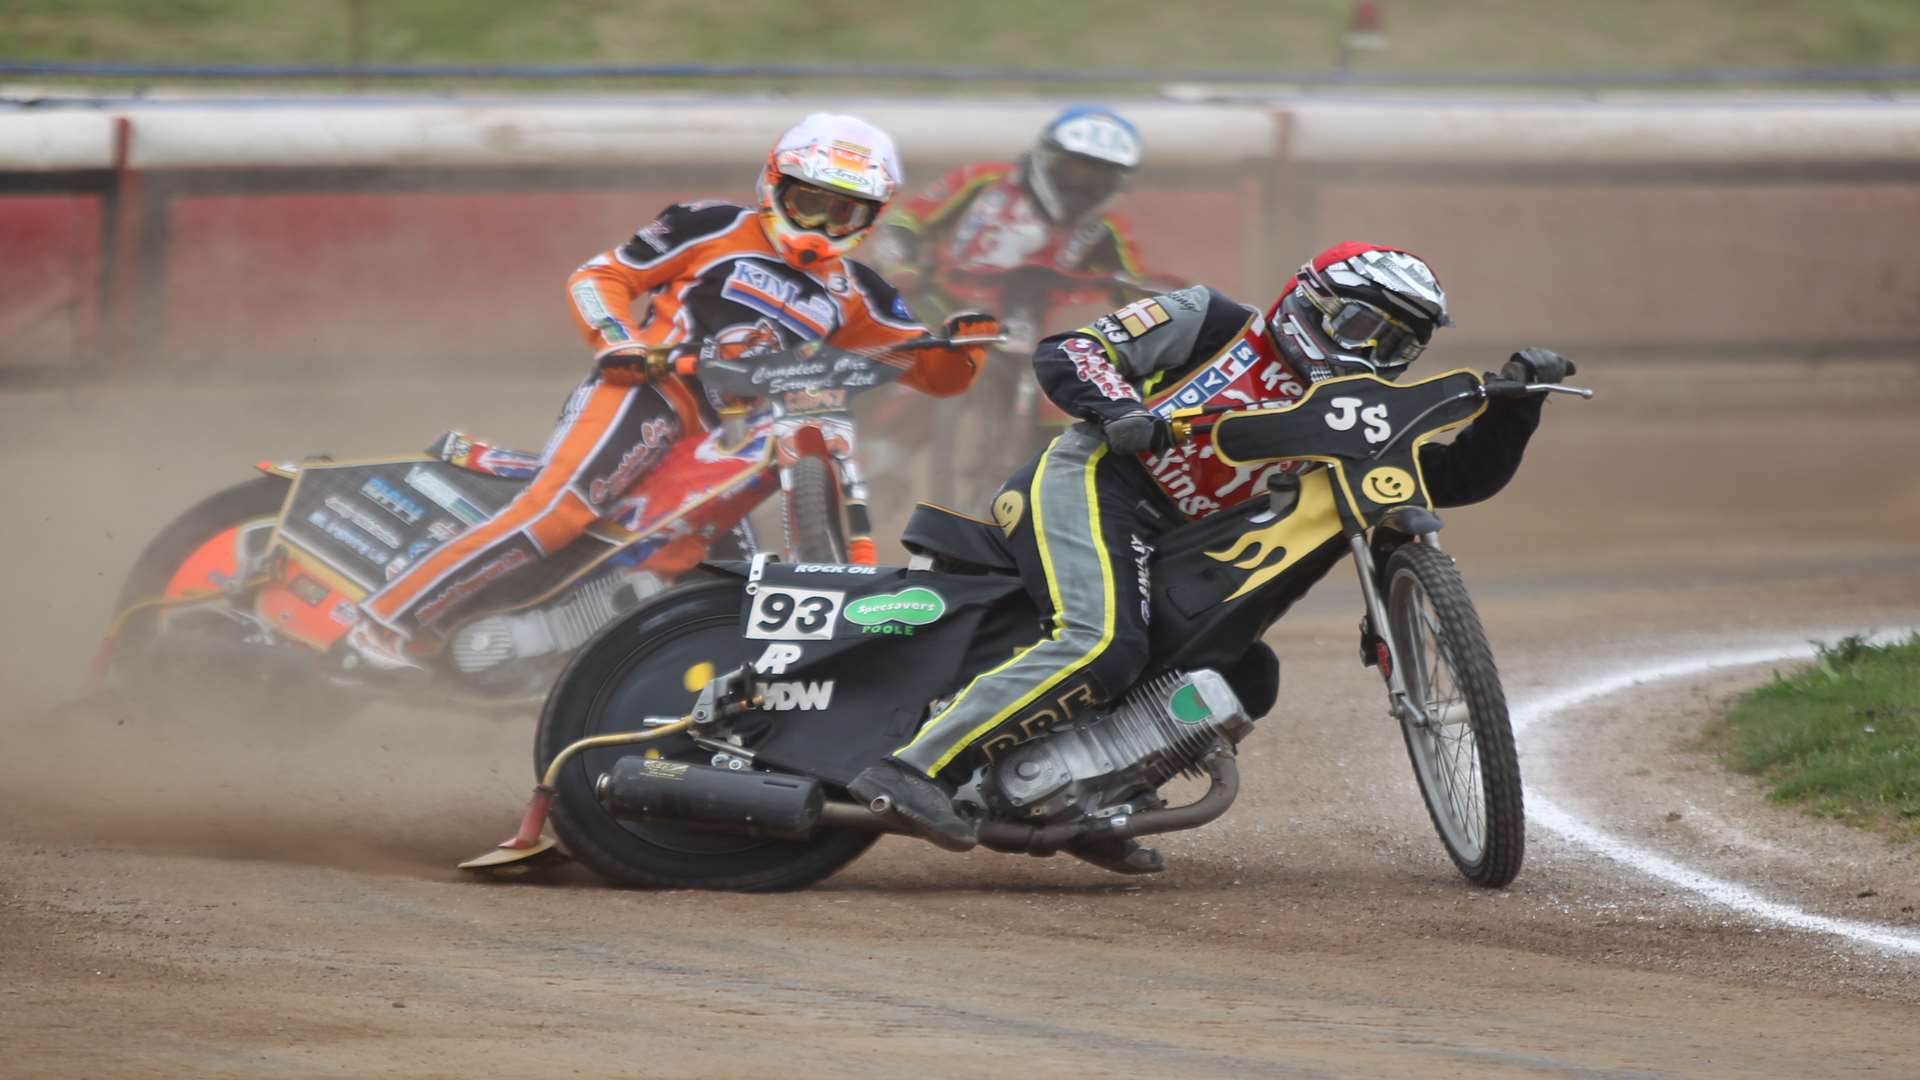 Speedway action at Central Park